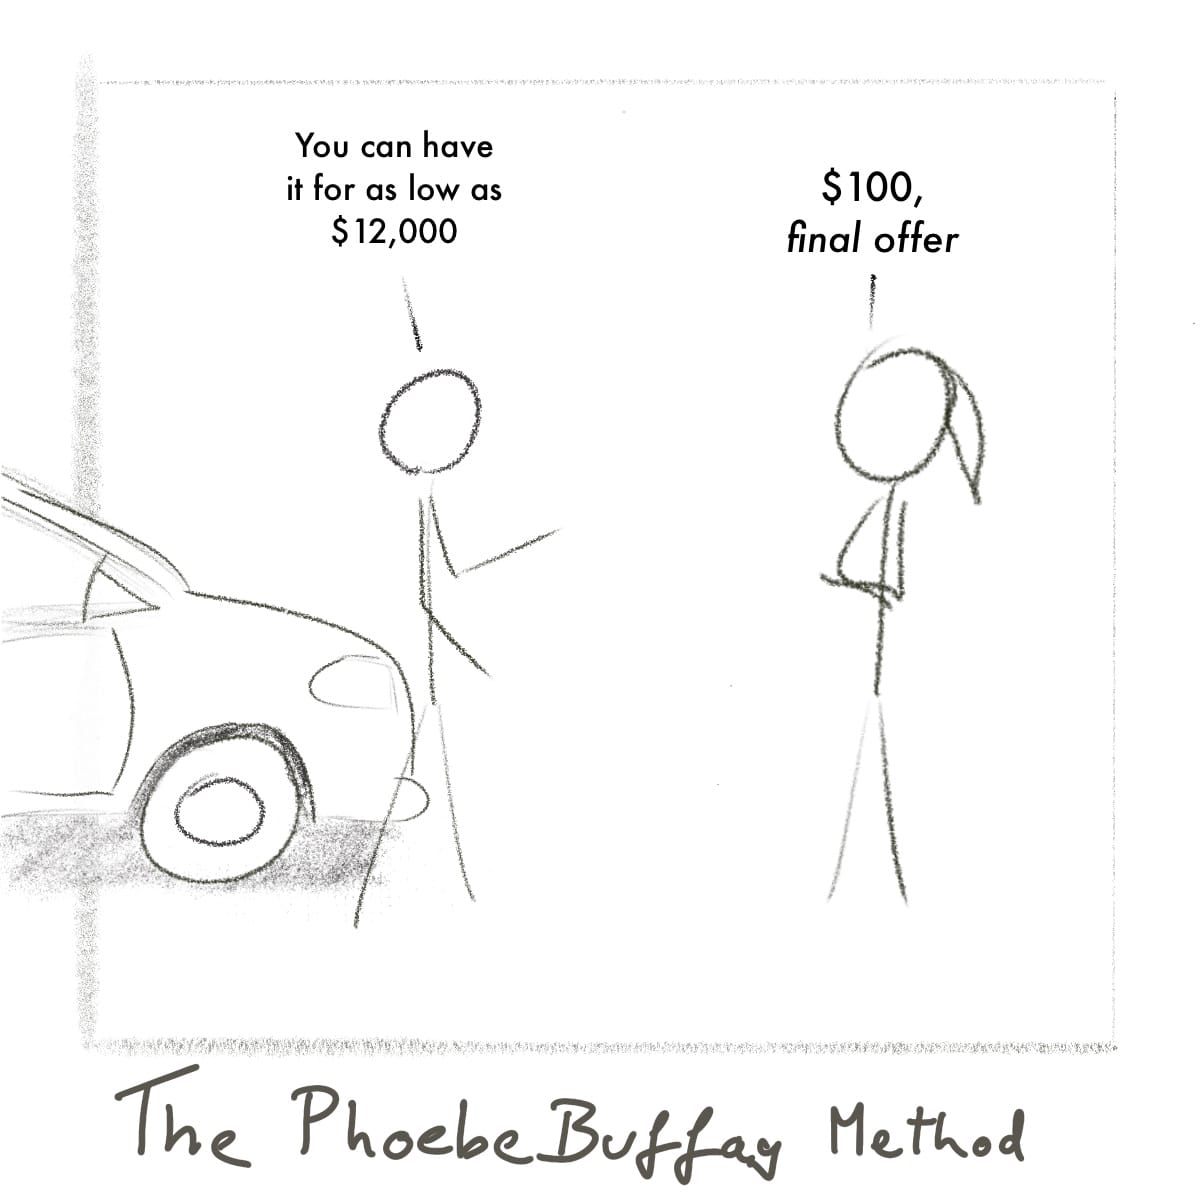 Stick figure standing in front of a car saying "You can have it for as low as $12,000". Other stick figure with a pony tail, arms crossed, says "$100, final offer". Image is captioned with "The Phoebe Buffay Method"